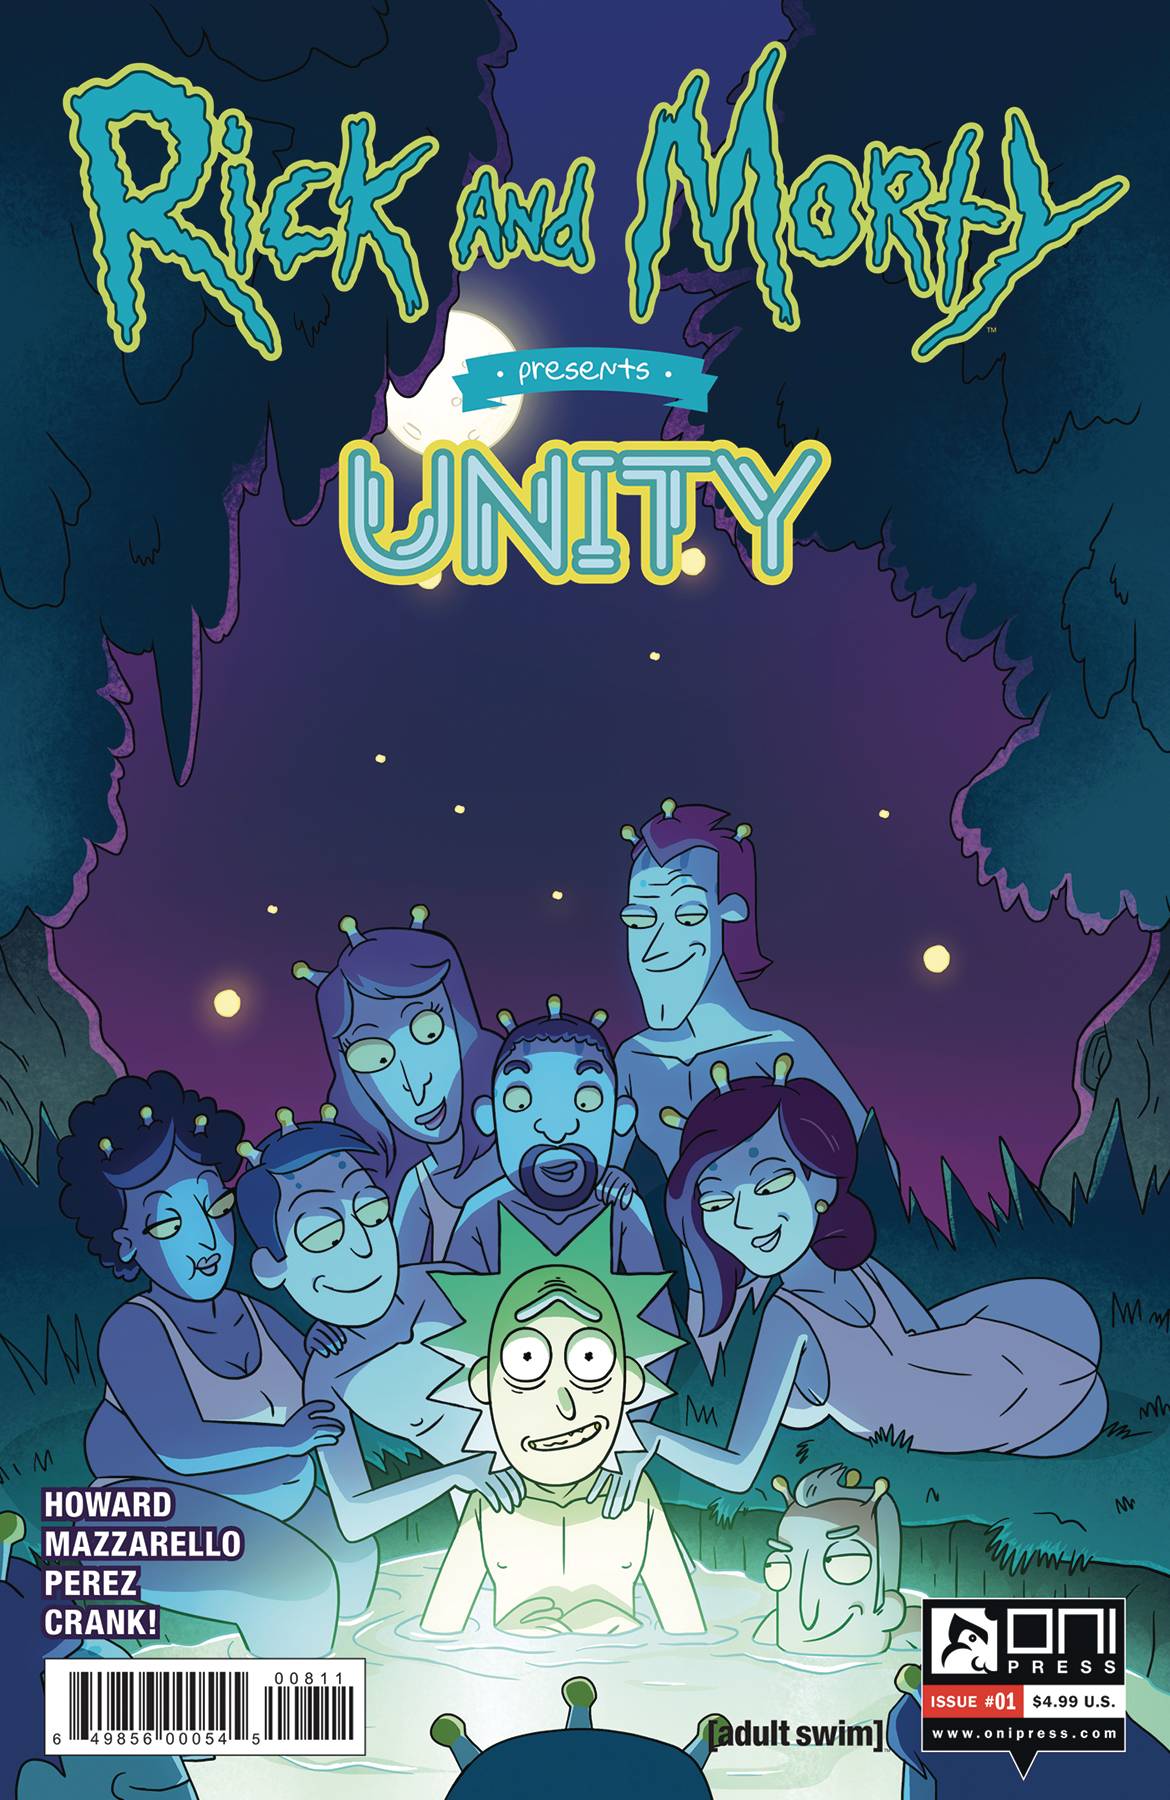 Rick And Morty Presents: Unity #1 (2019)